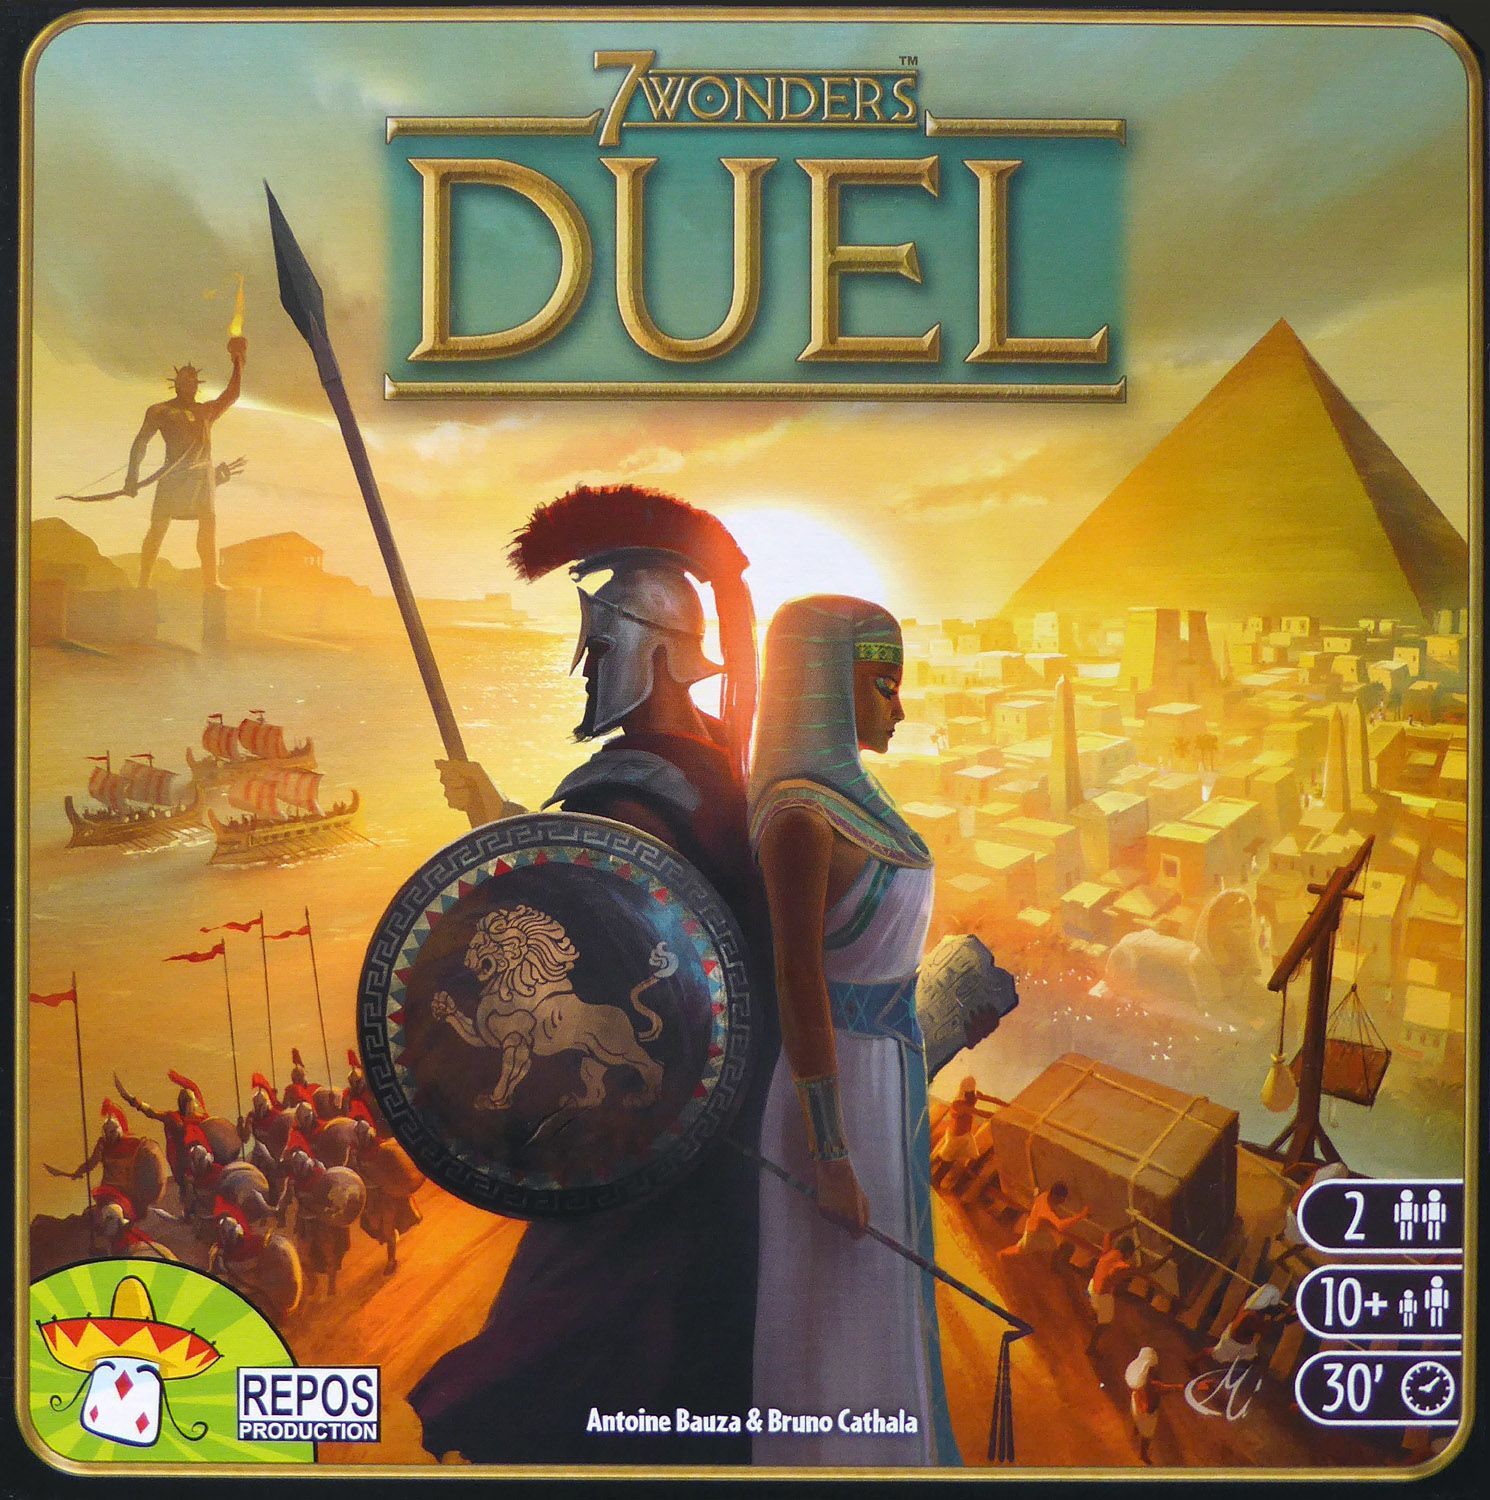 Read more about the article 7 Wonders: Duel